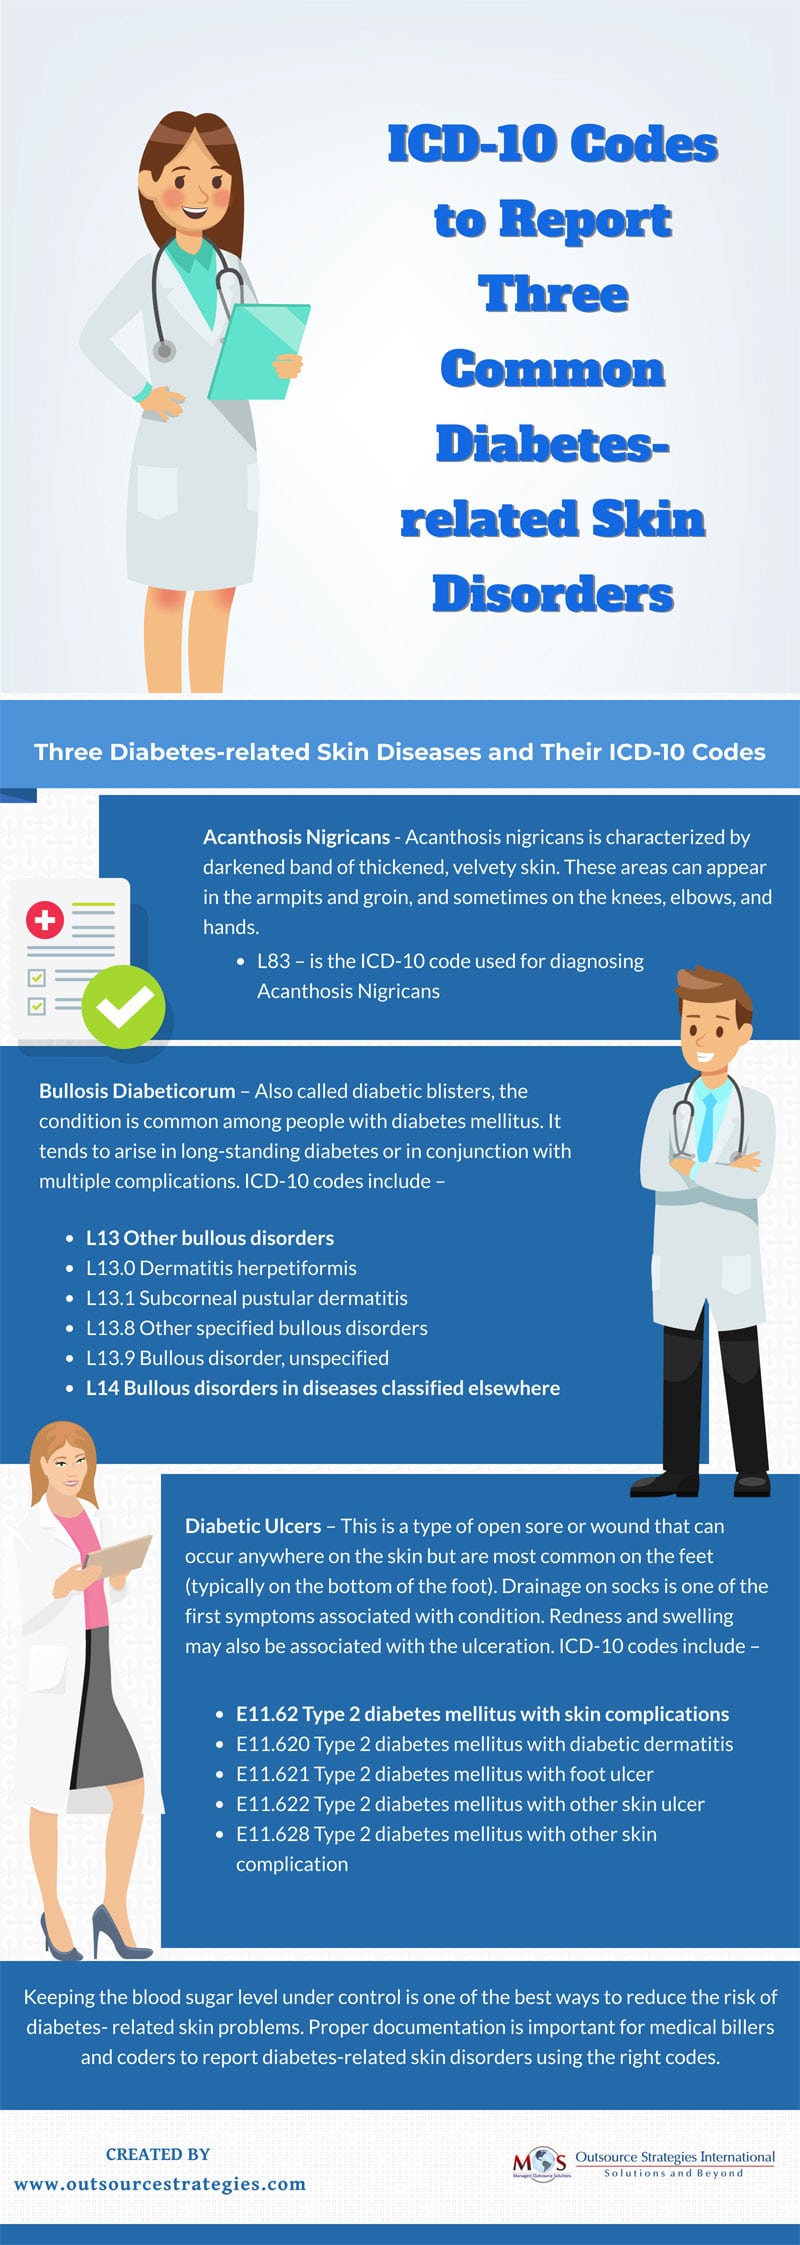 Overview of ICD-10 Codes for Wound Care Billing | I-Med Claims